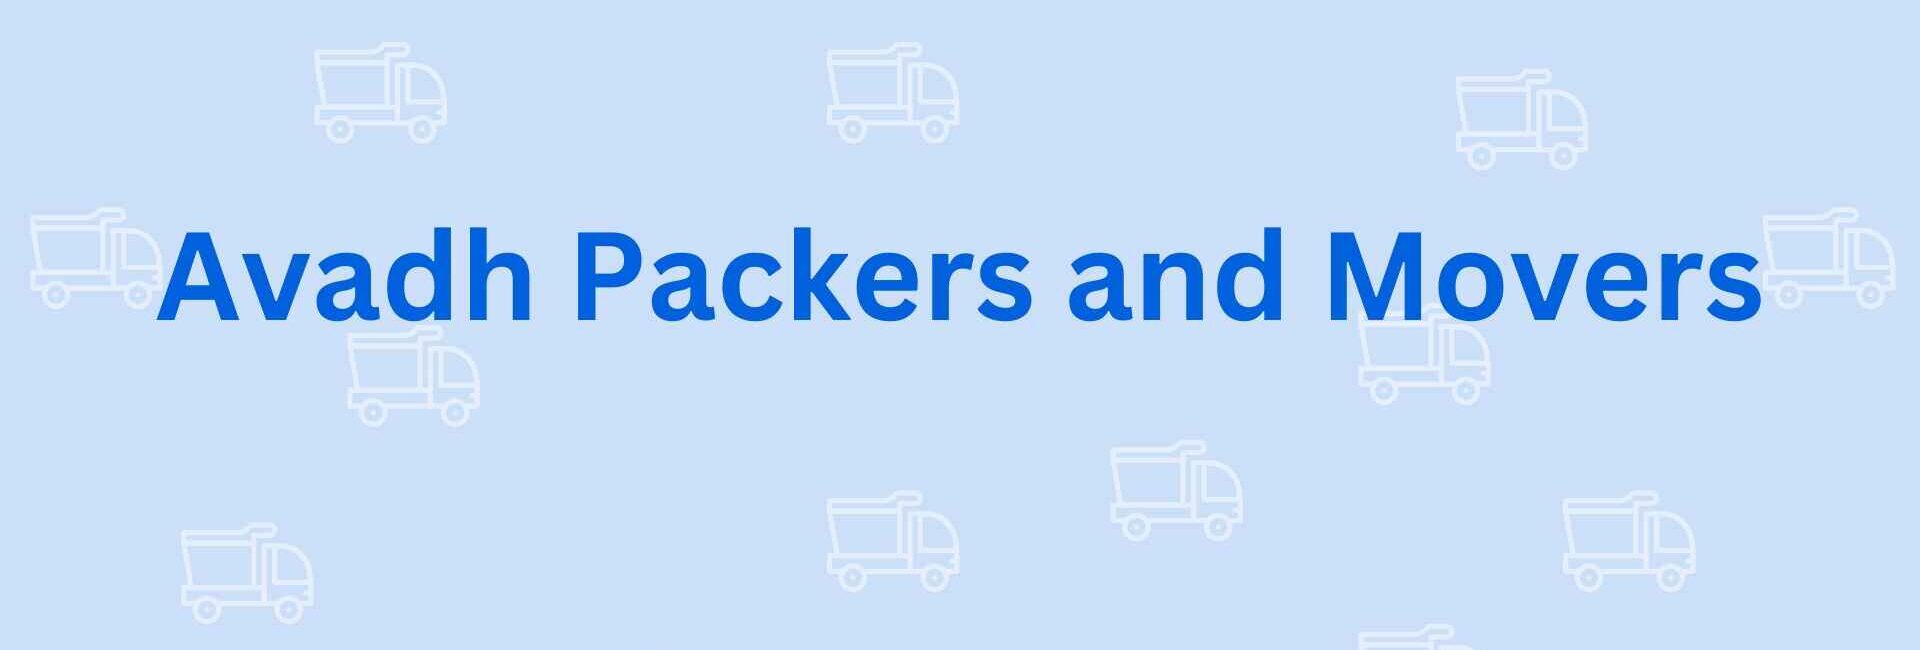 Avadh Packers and Movers - Packers and Movers in Noida